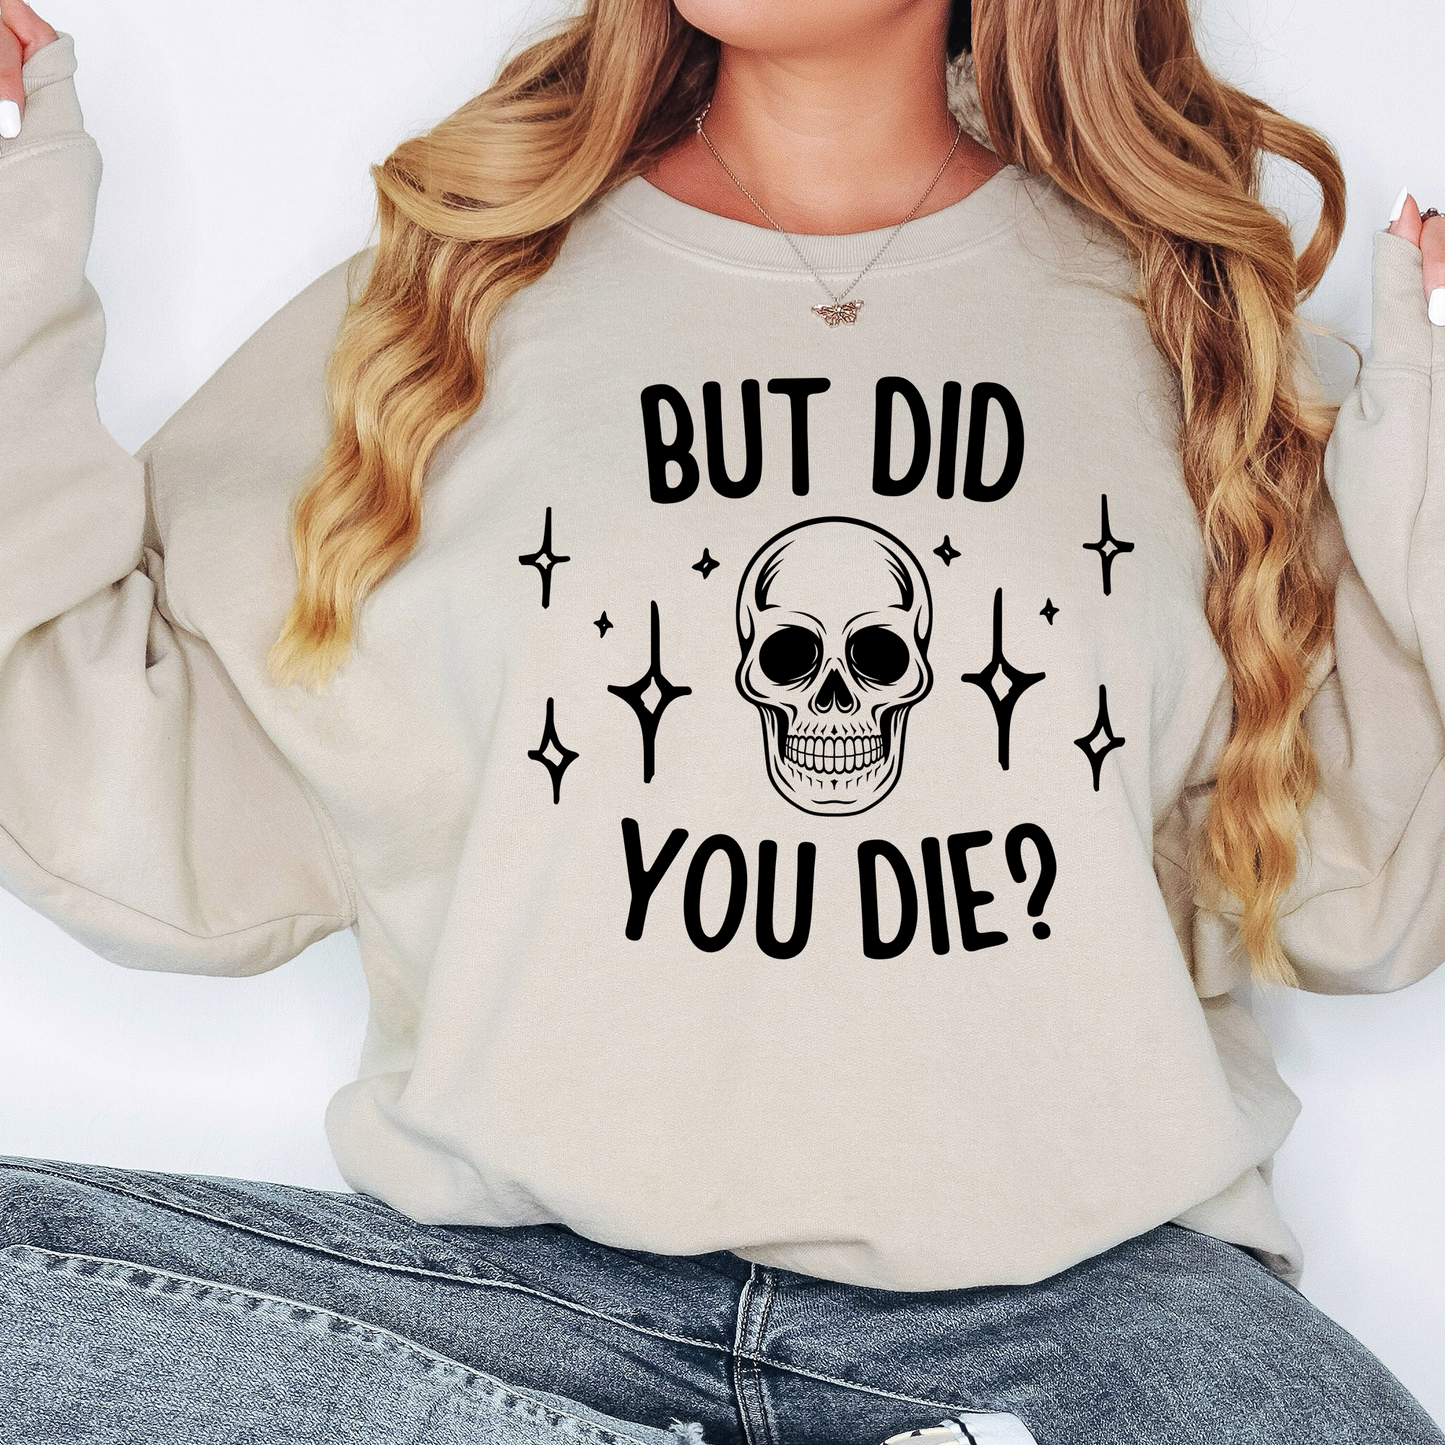 a woman wearing a sweatshirt that says, but did you die?